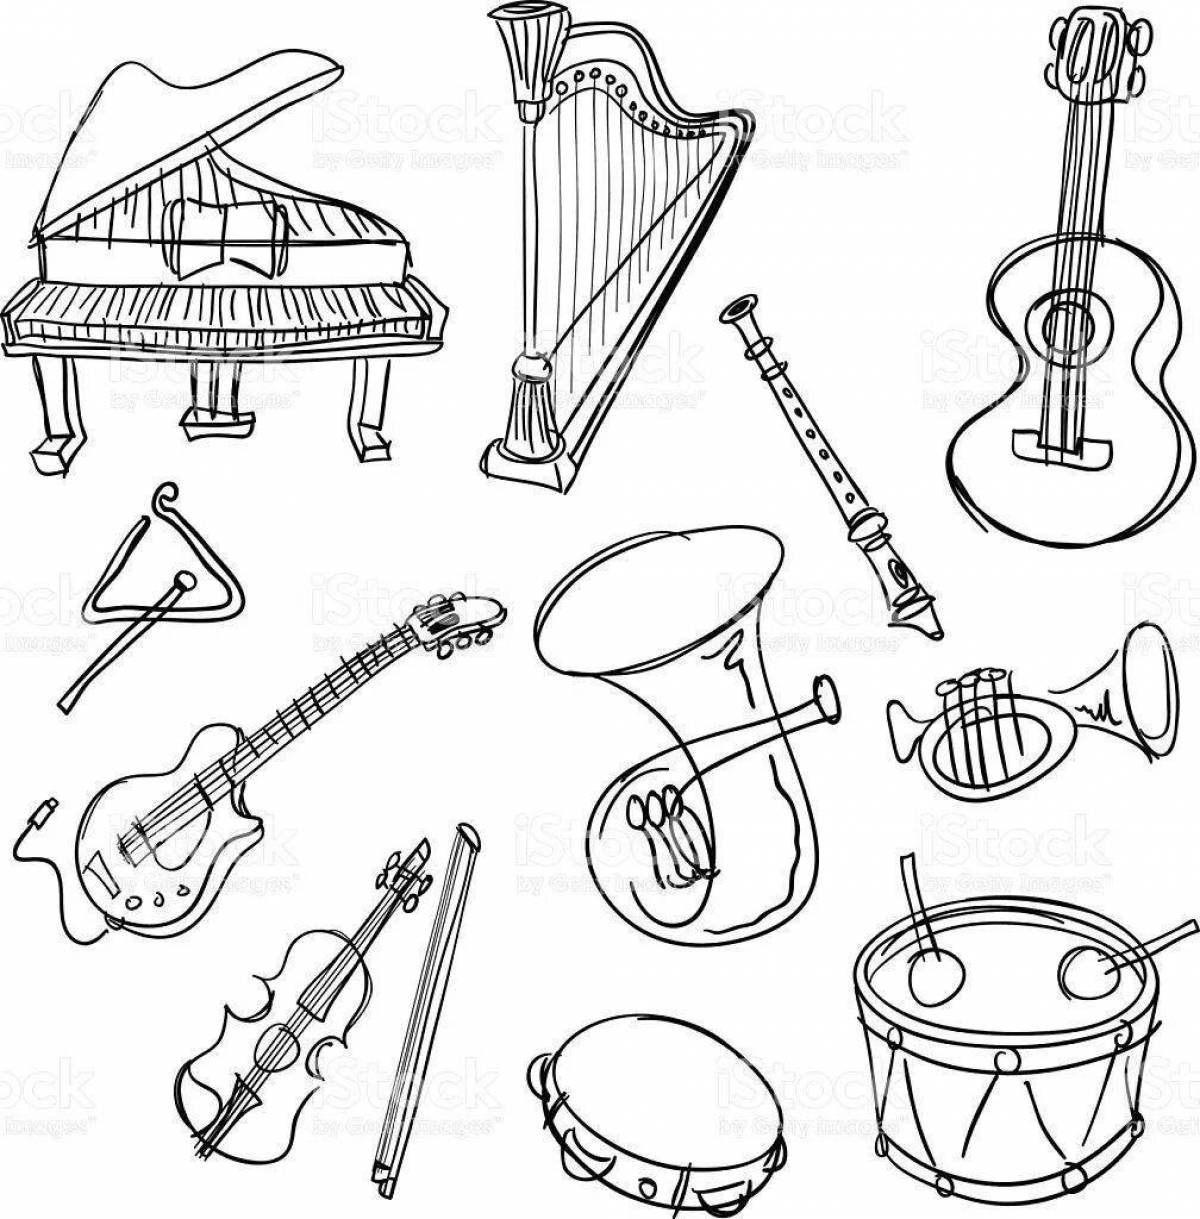 Painting folk musical instruments coloring pages for children